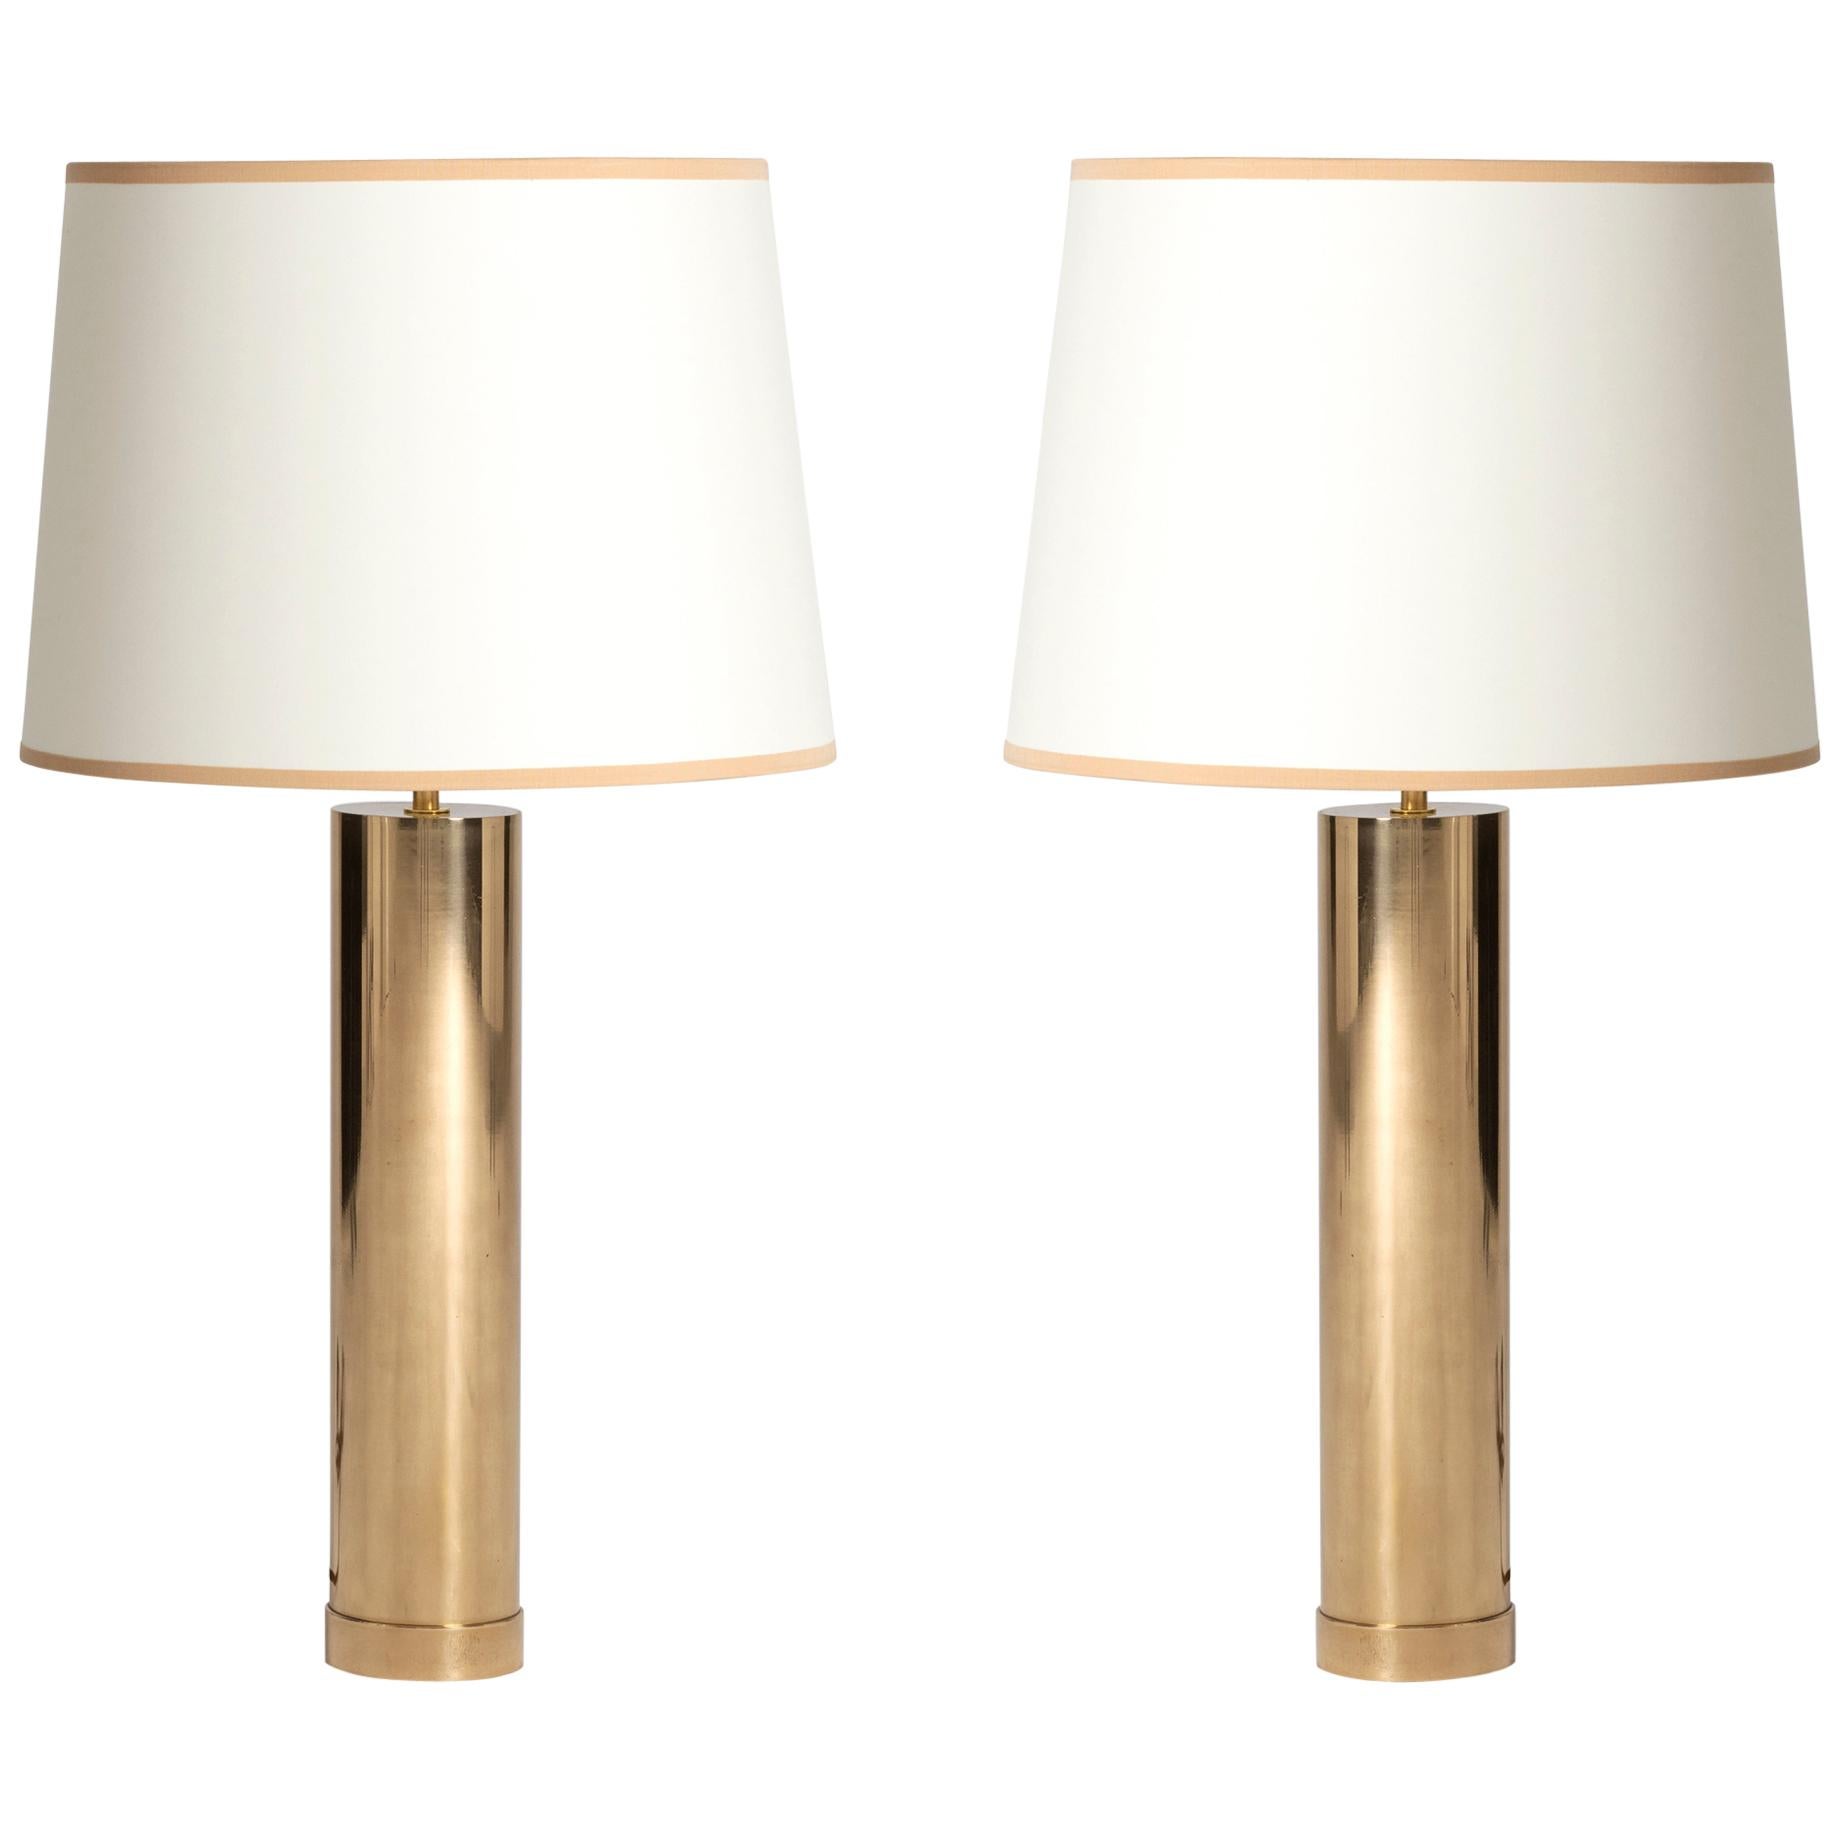 Pair of Large Midcentury Brass Table Lamps by Bergbom